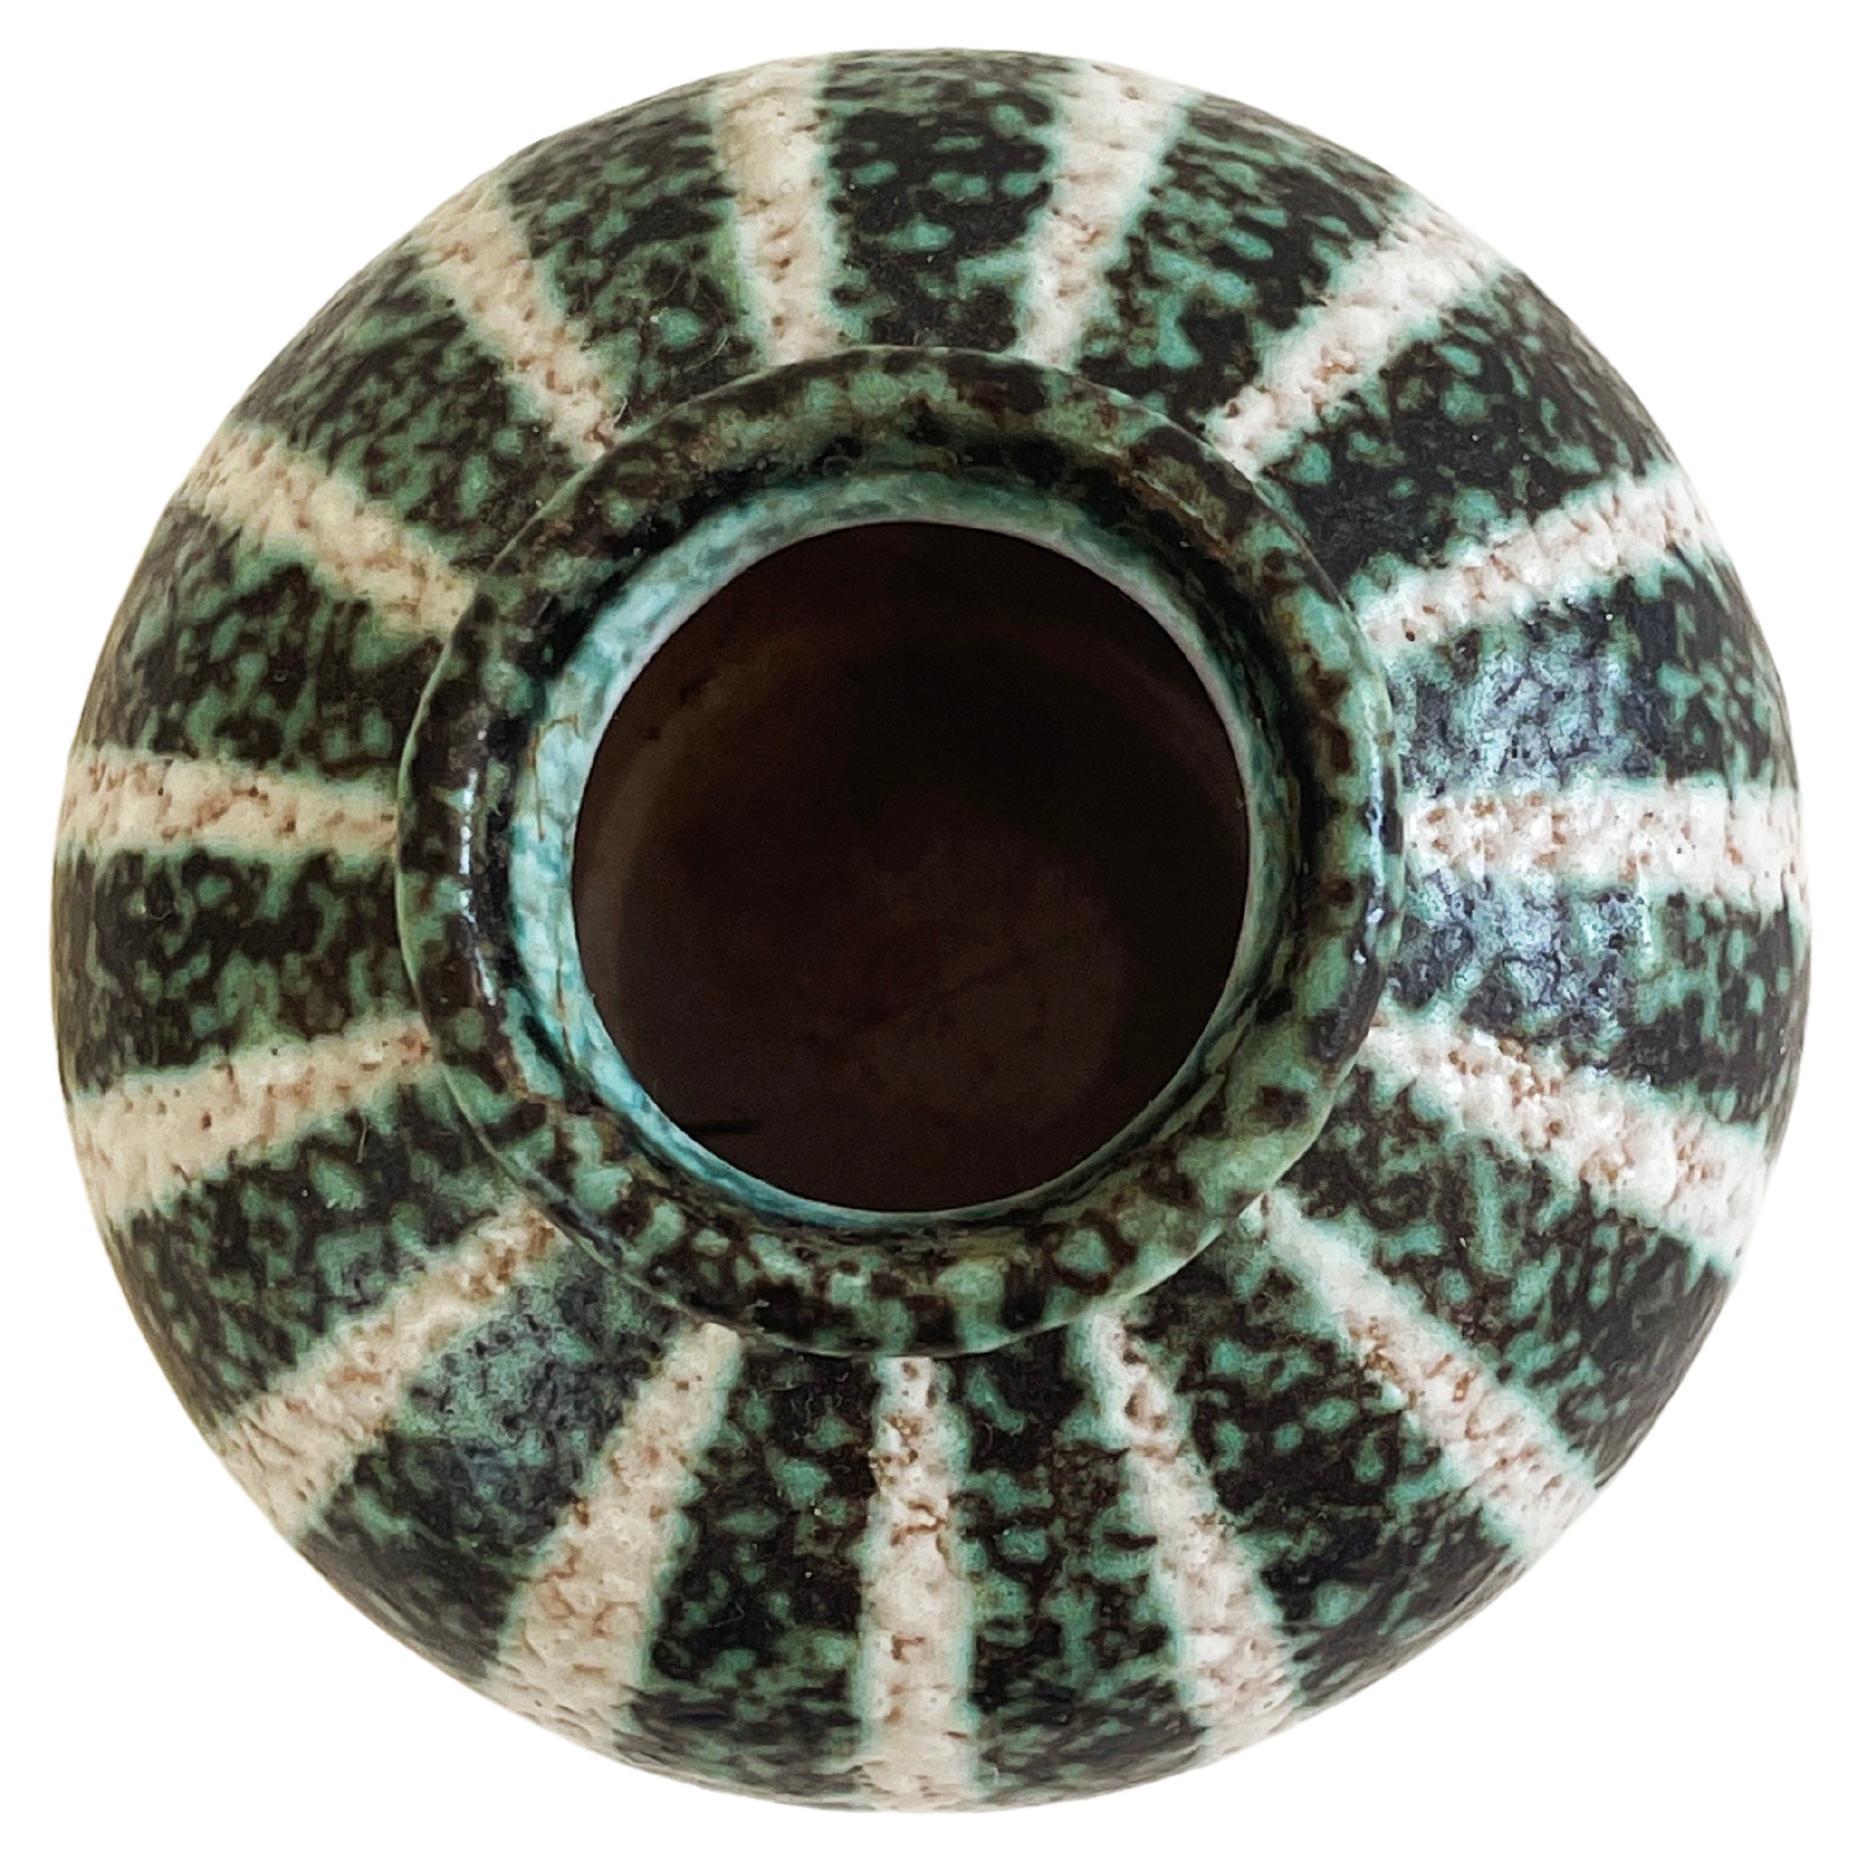 Funky zebra-pumpkin striped mid-century ceramic vase.
Executed by Kurt Tschörner, around 1960 for Ruscha, Western Germany. 
Bubbly Fat Lava glaze in a green-black & natural white with the light brown base ceramic shining through.
Hand painted and